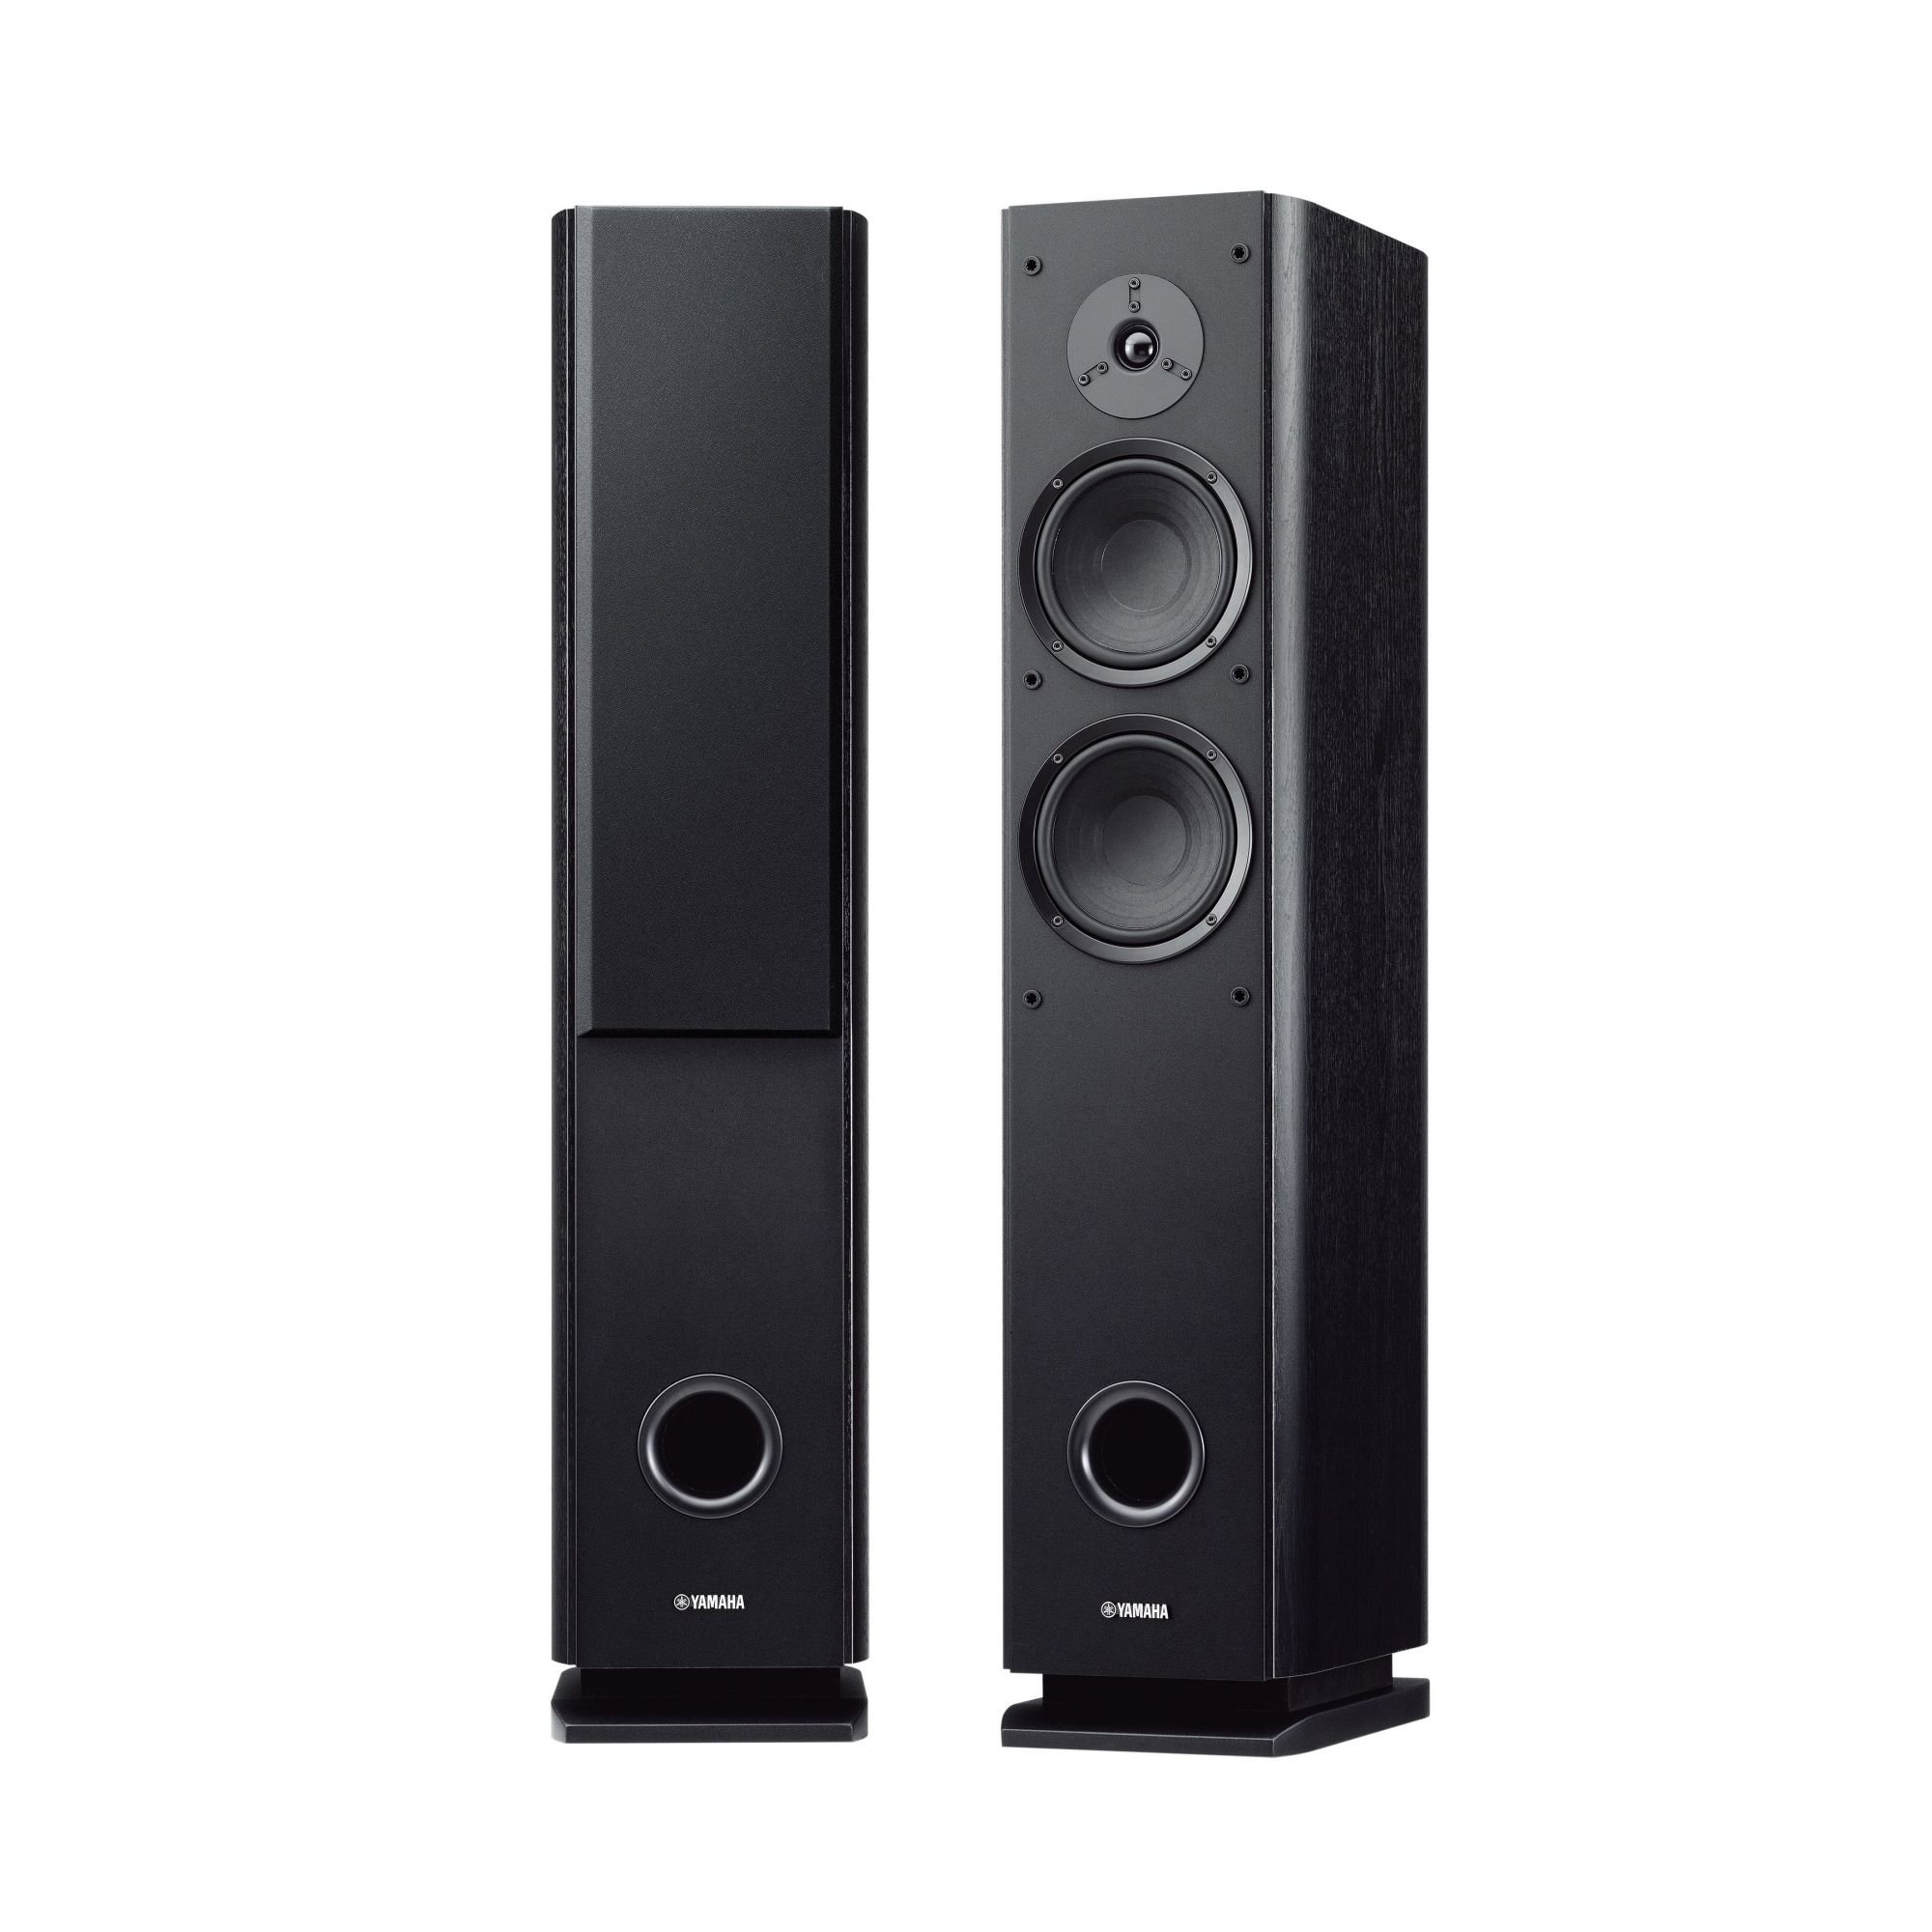 Yamaha NS-F160 Tower Speaker online price in india